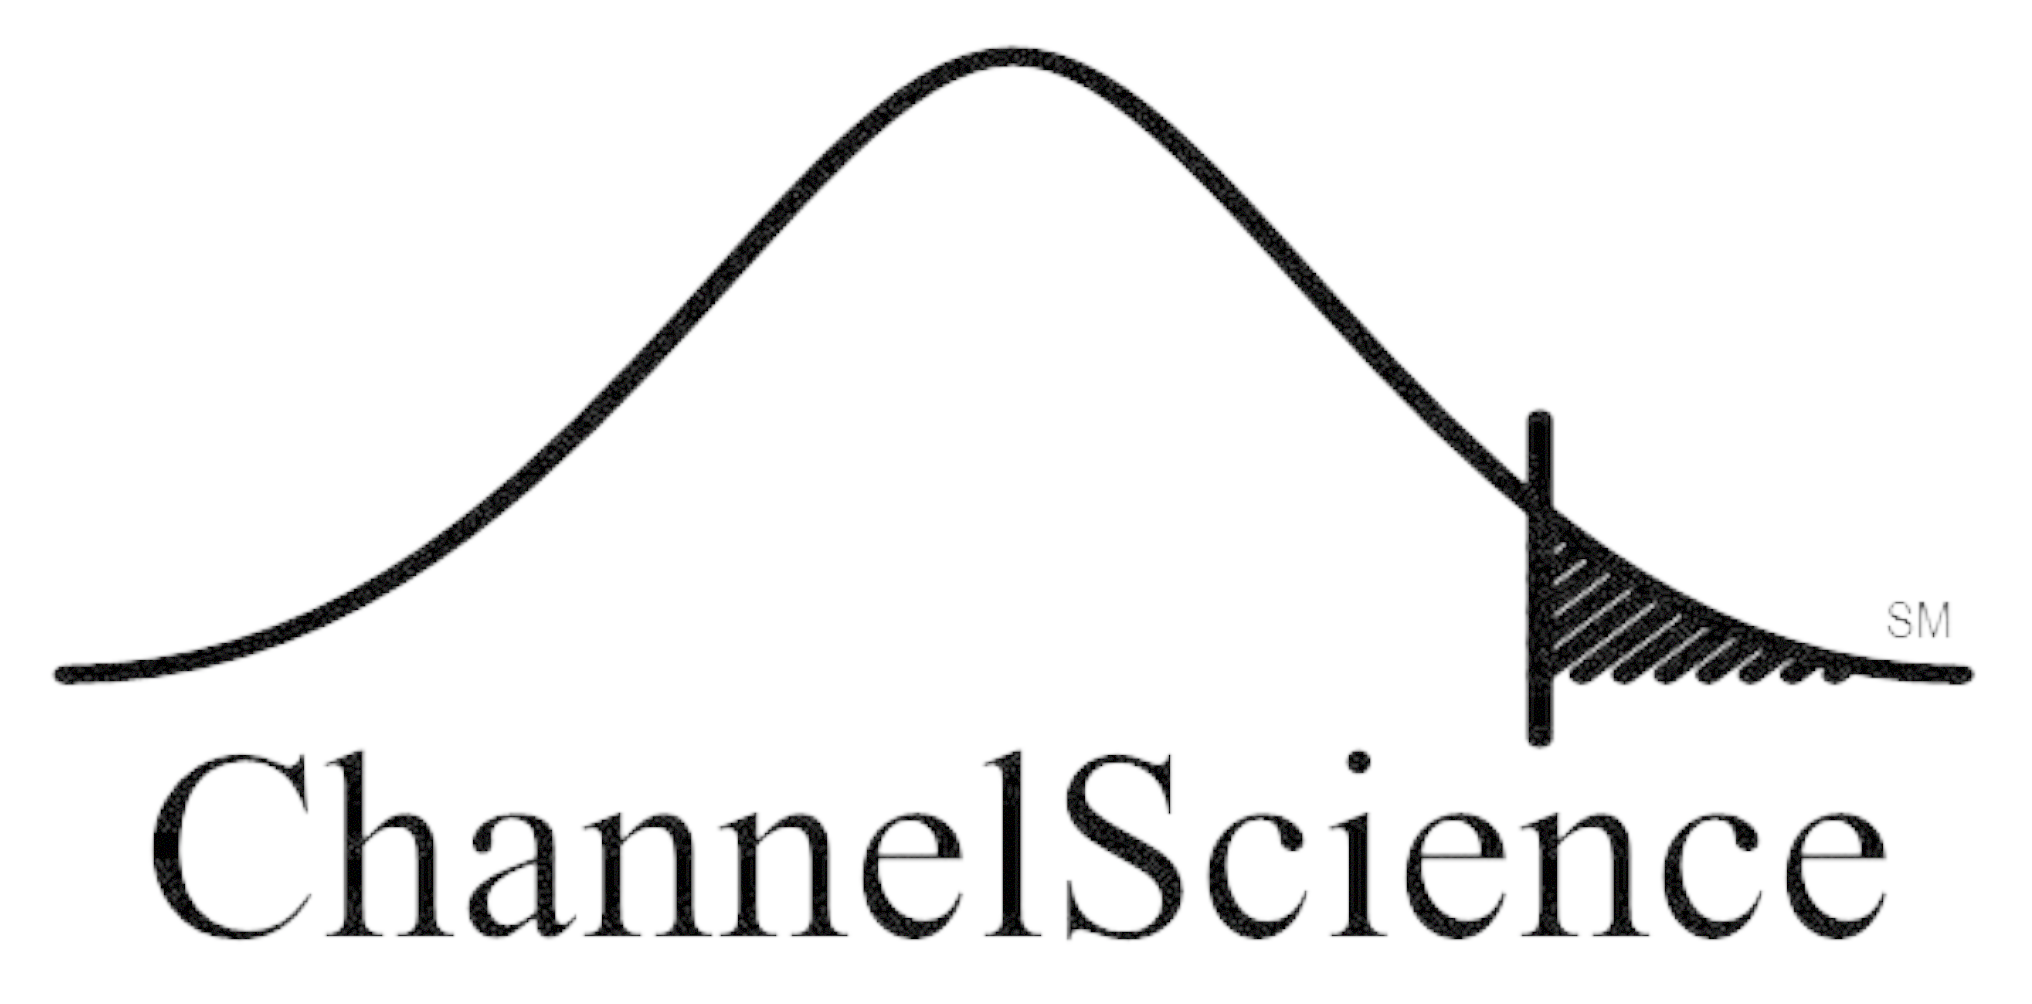 Channel Science